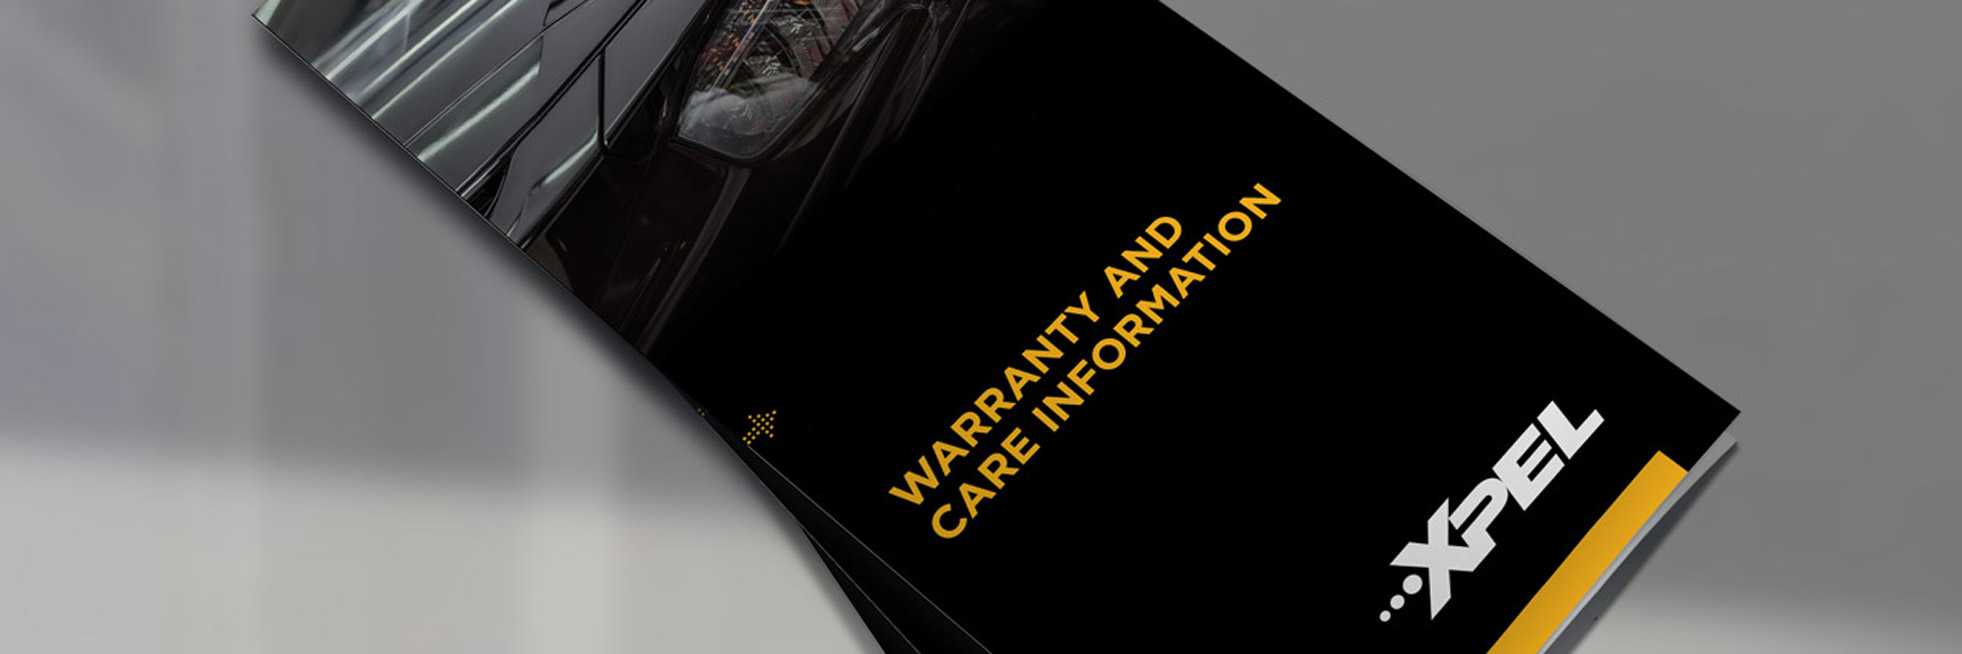 xpel warranty and care information brochure cover